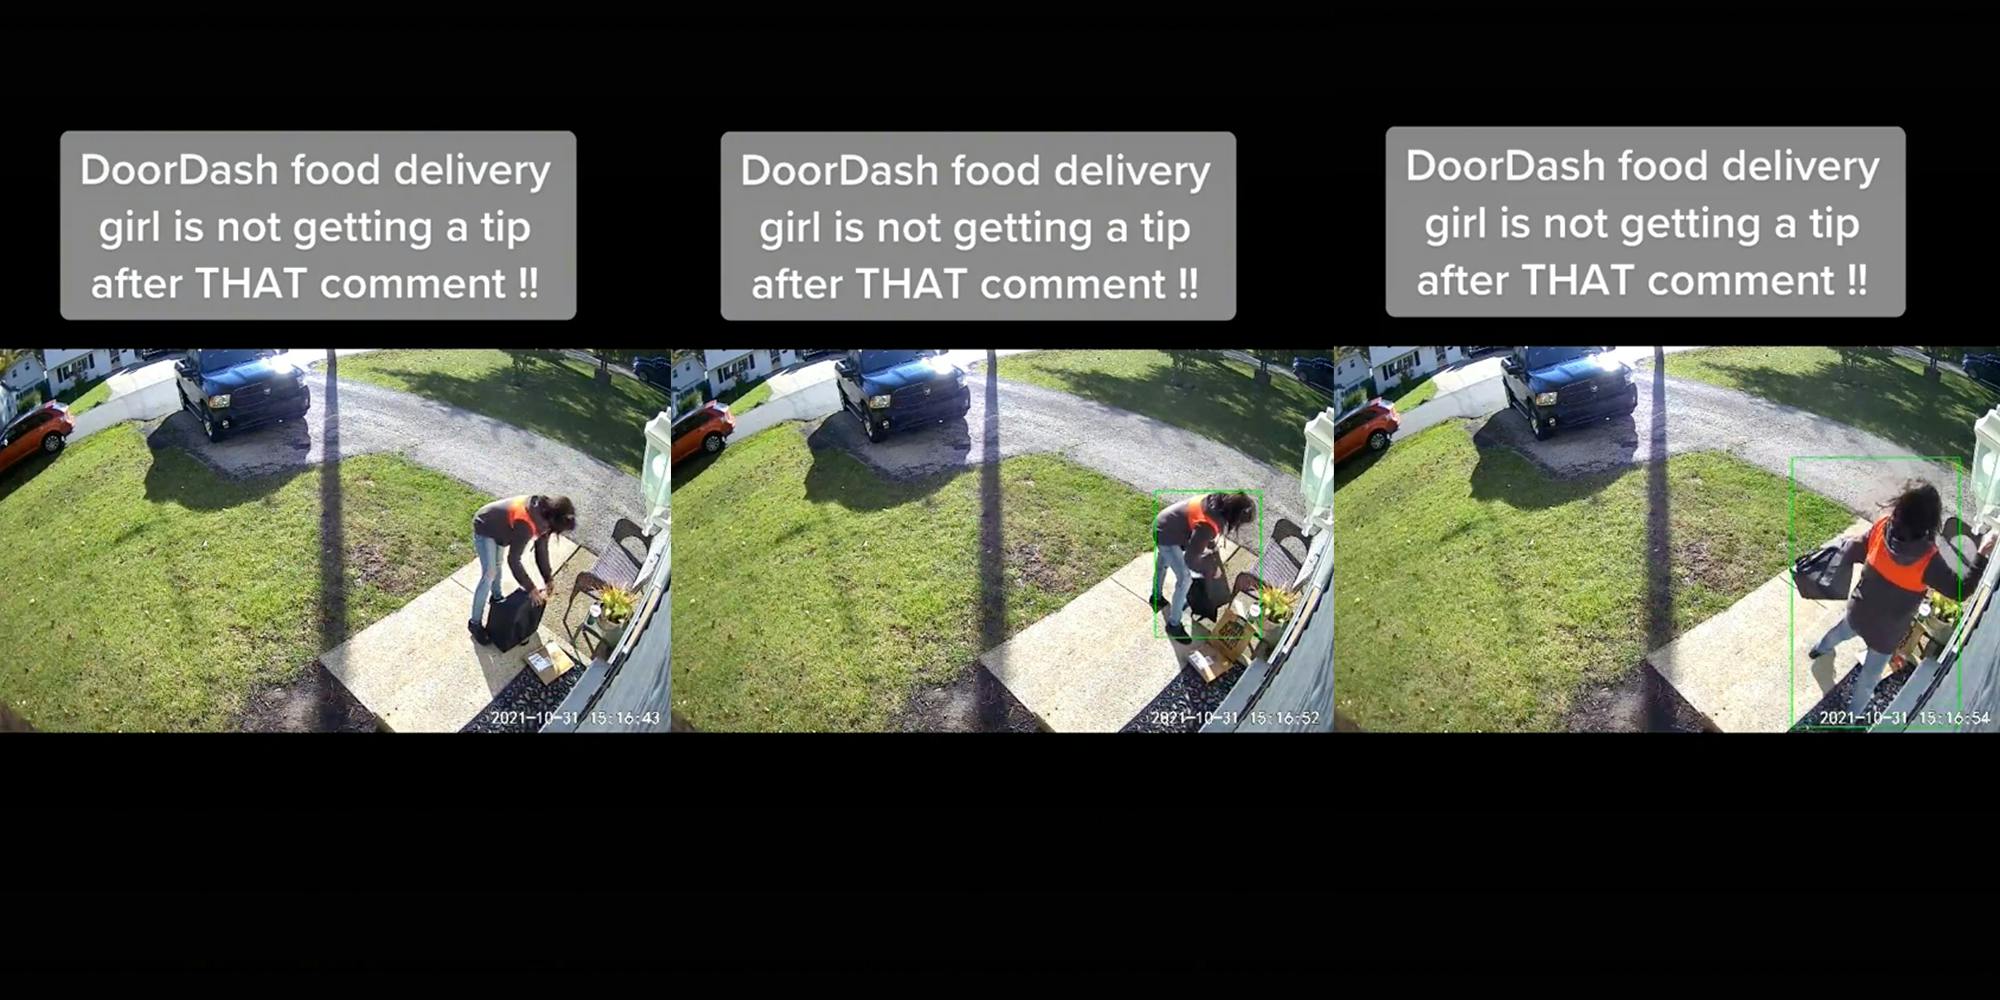 TikToker says DoorDasher called out 'you're so fat' while making delivery.